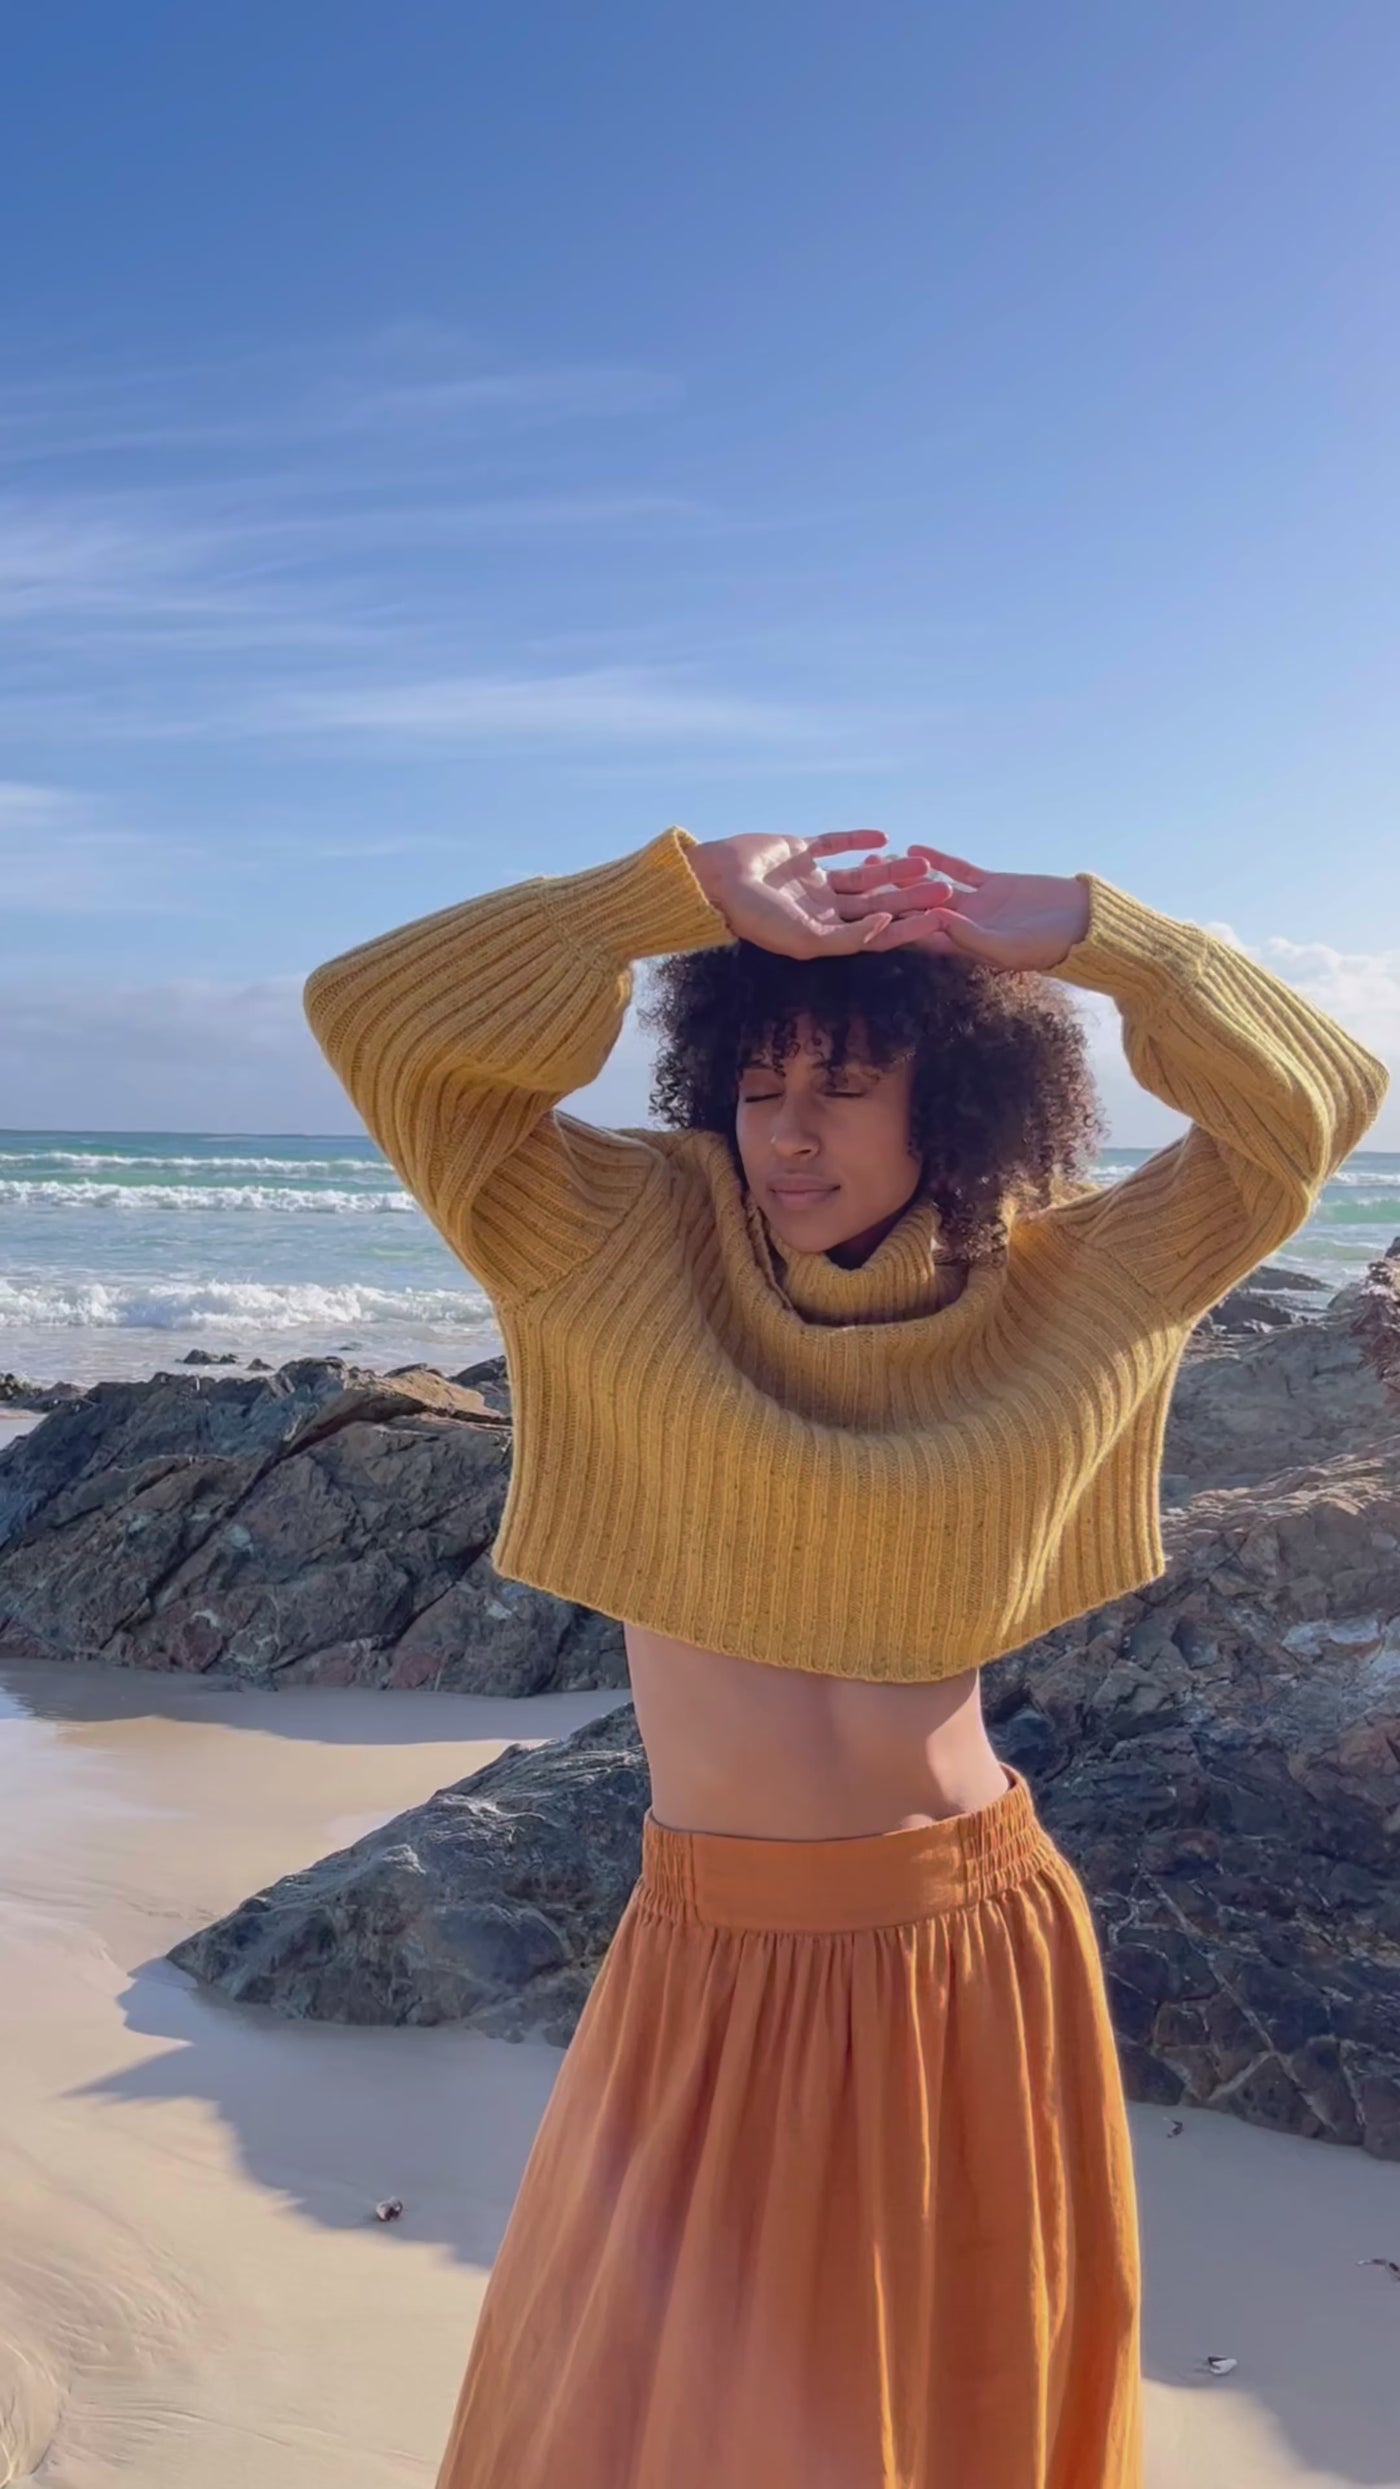 Video of LILLY PILLY Collection Arya merino wool Knitwear top in Sunflower speckle paired with Frida organic linen skirt in Cinnamon